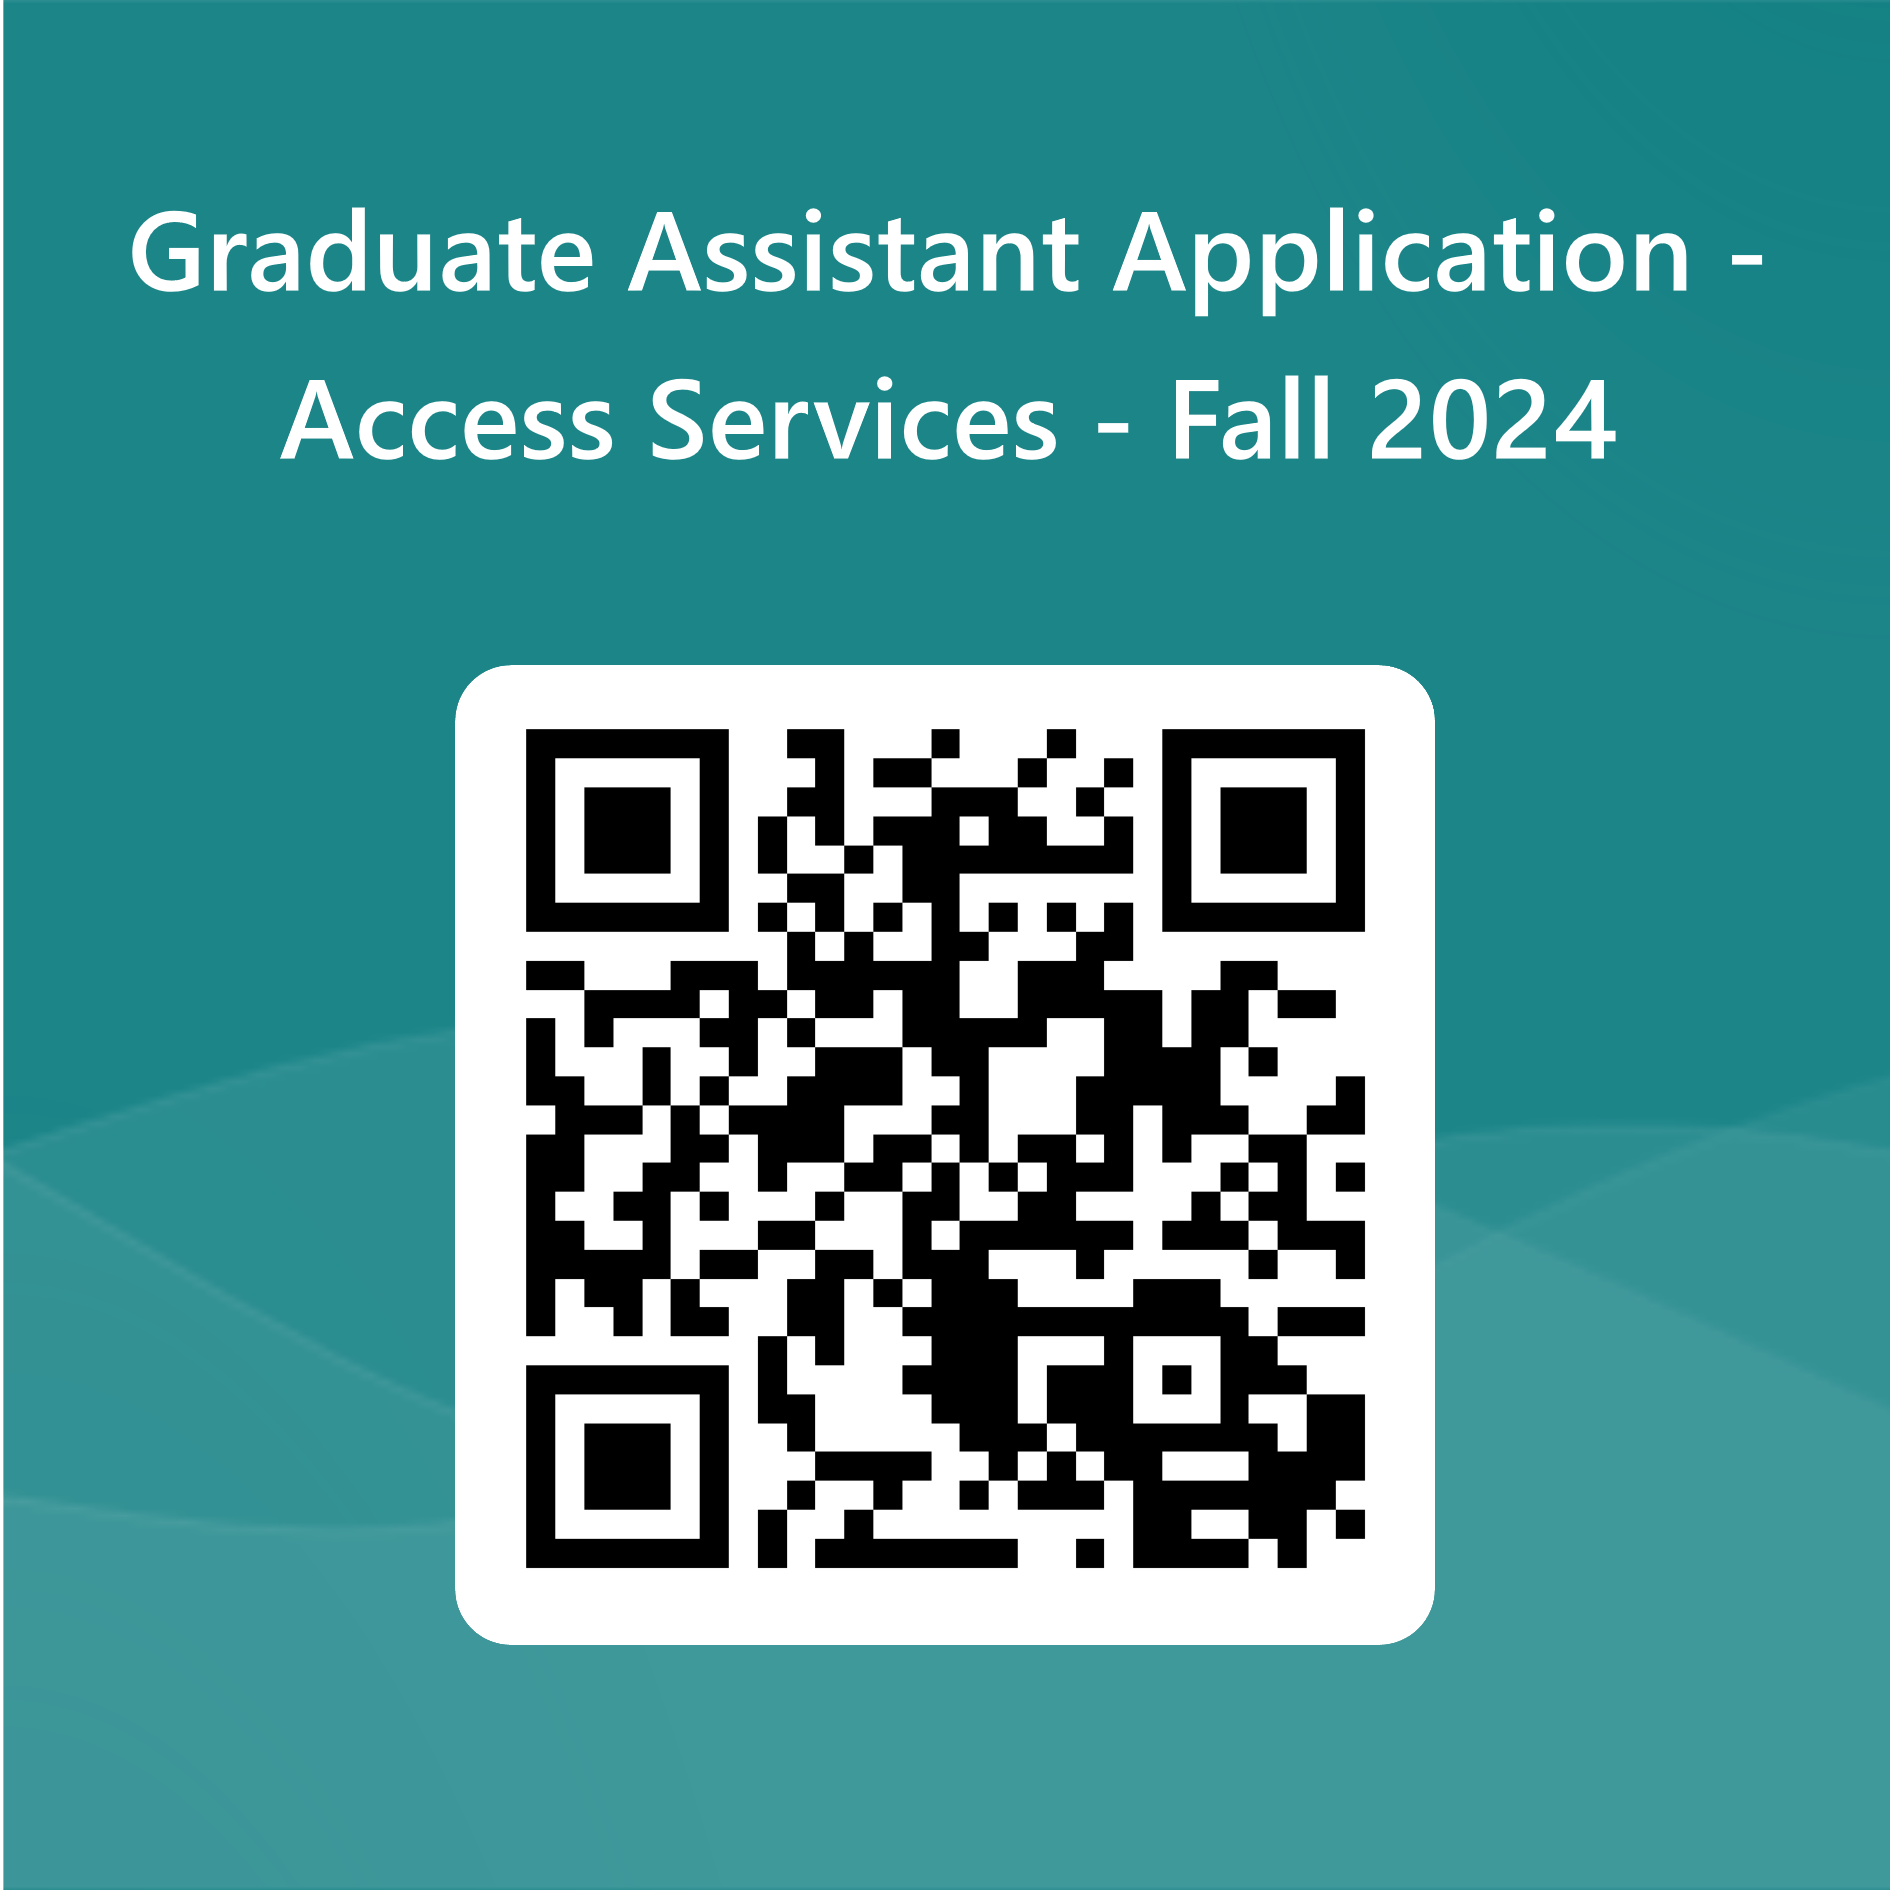 qr code linking to the online application form for the Morris Library Access Services Fall 2024 Graduate Assistantship